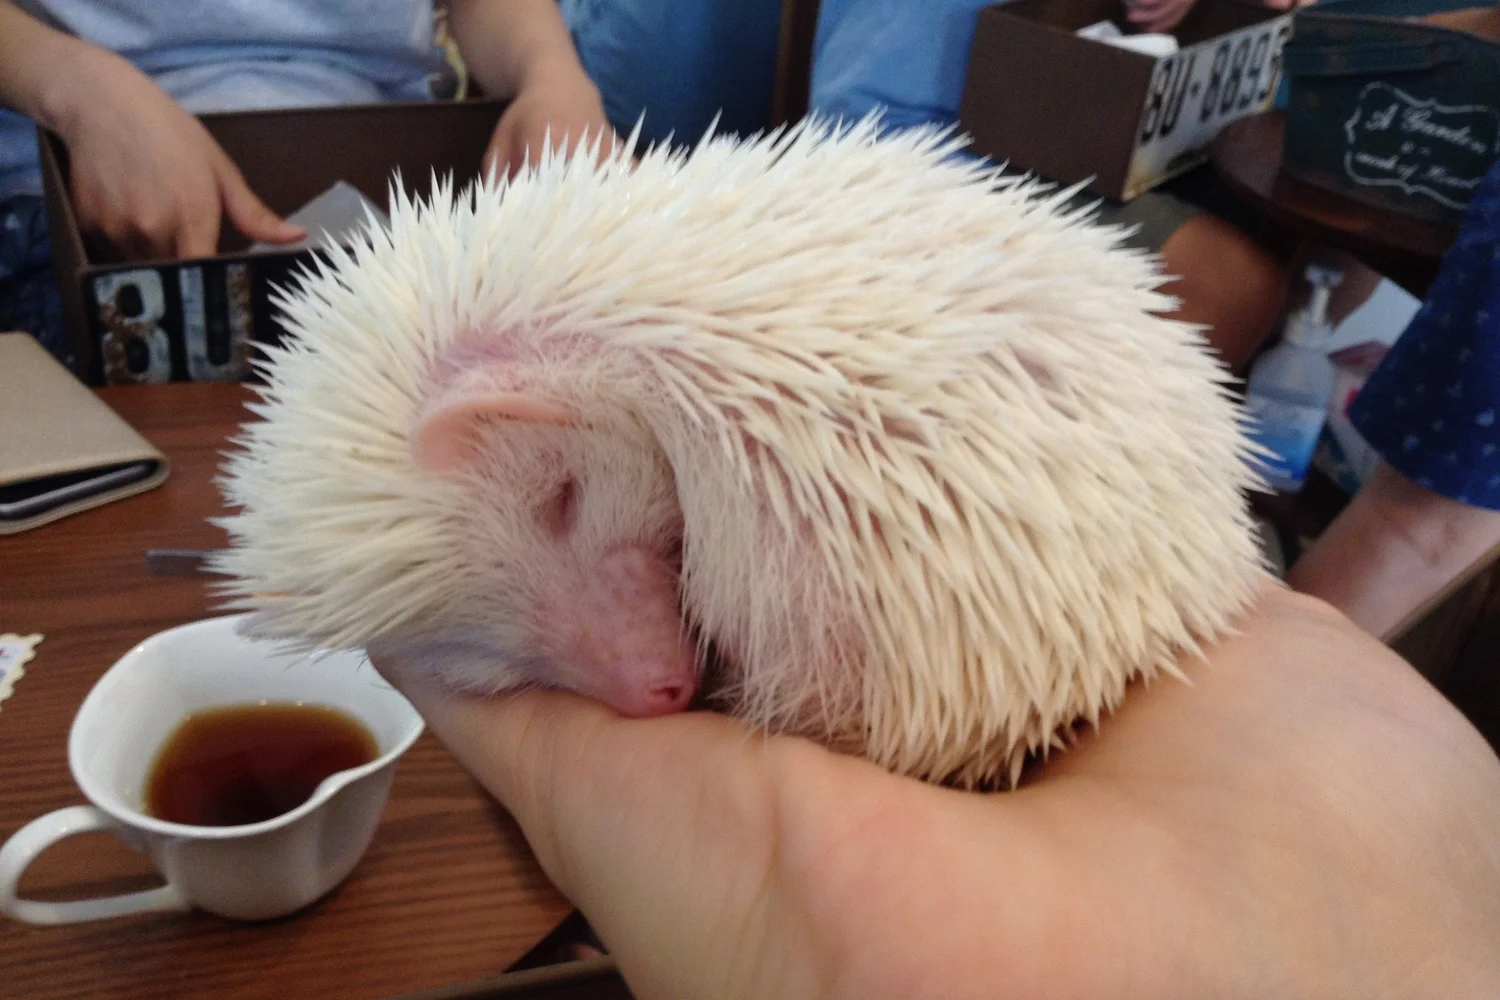 Play with cute hedgehogs at a cafe in Harajuku, Tokyo!